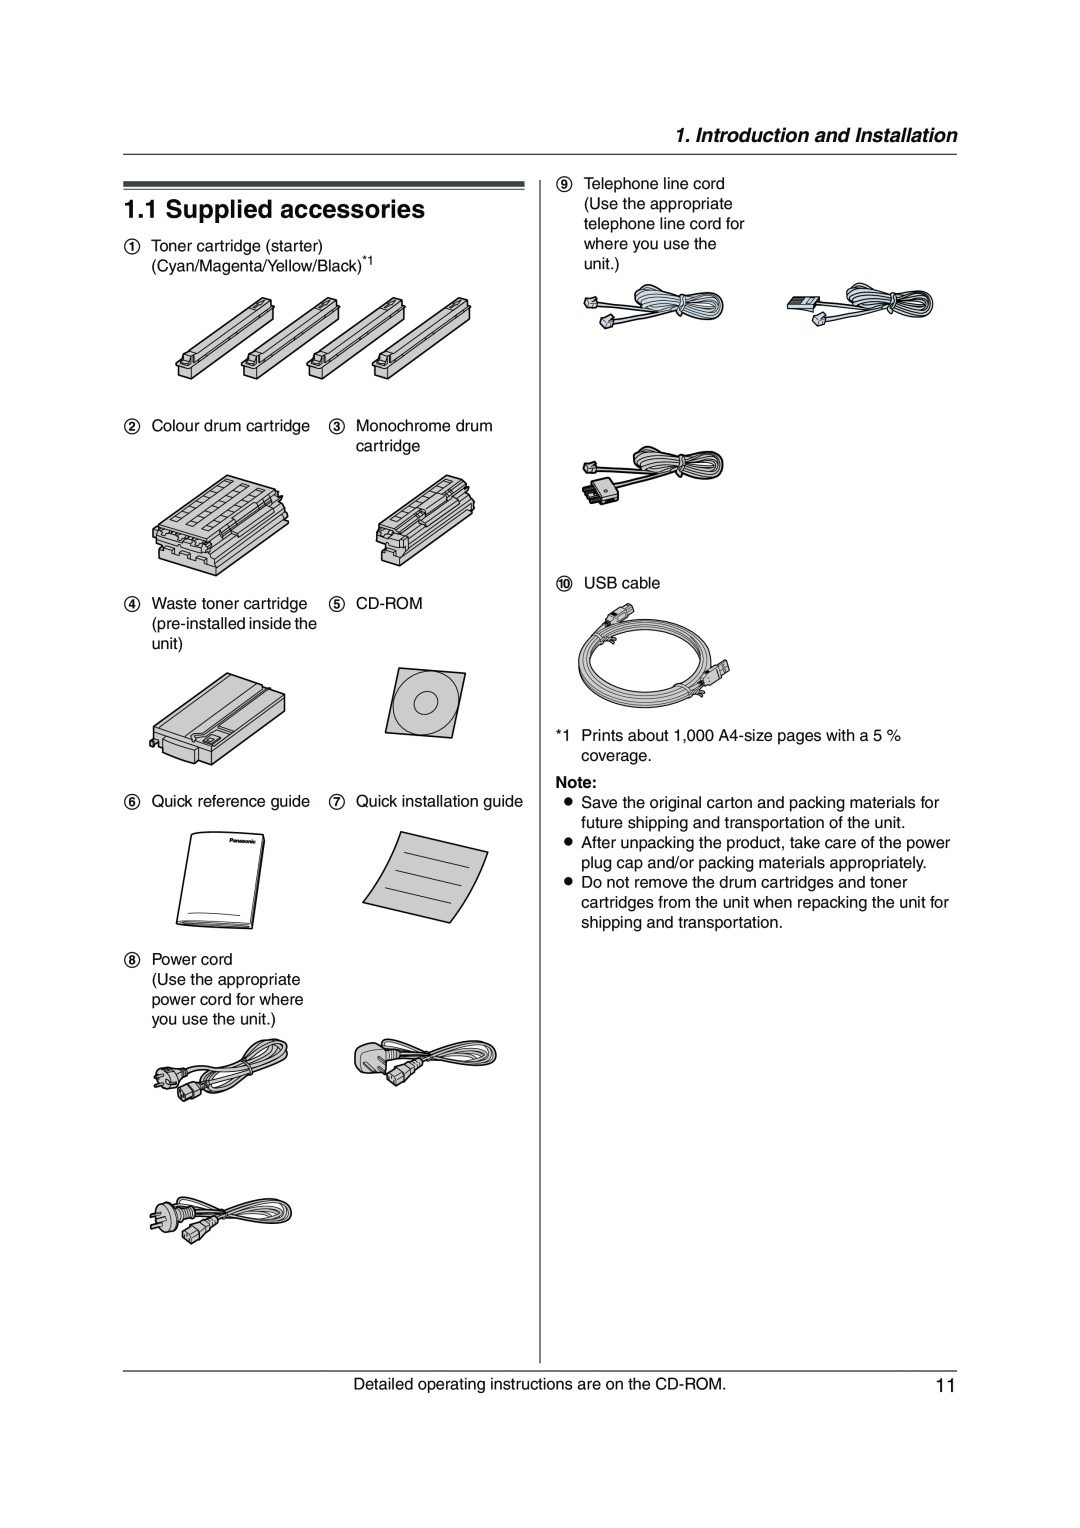 Panasonic KX-MC6020CX operating instructions Supplied accessories, Introduction and Installation 